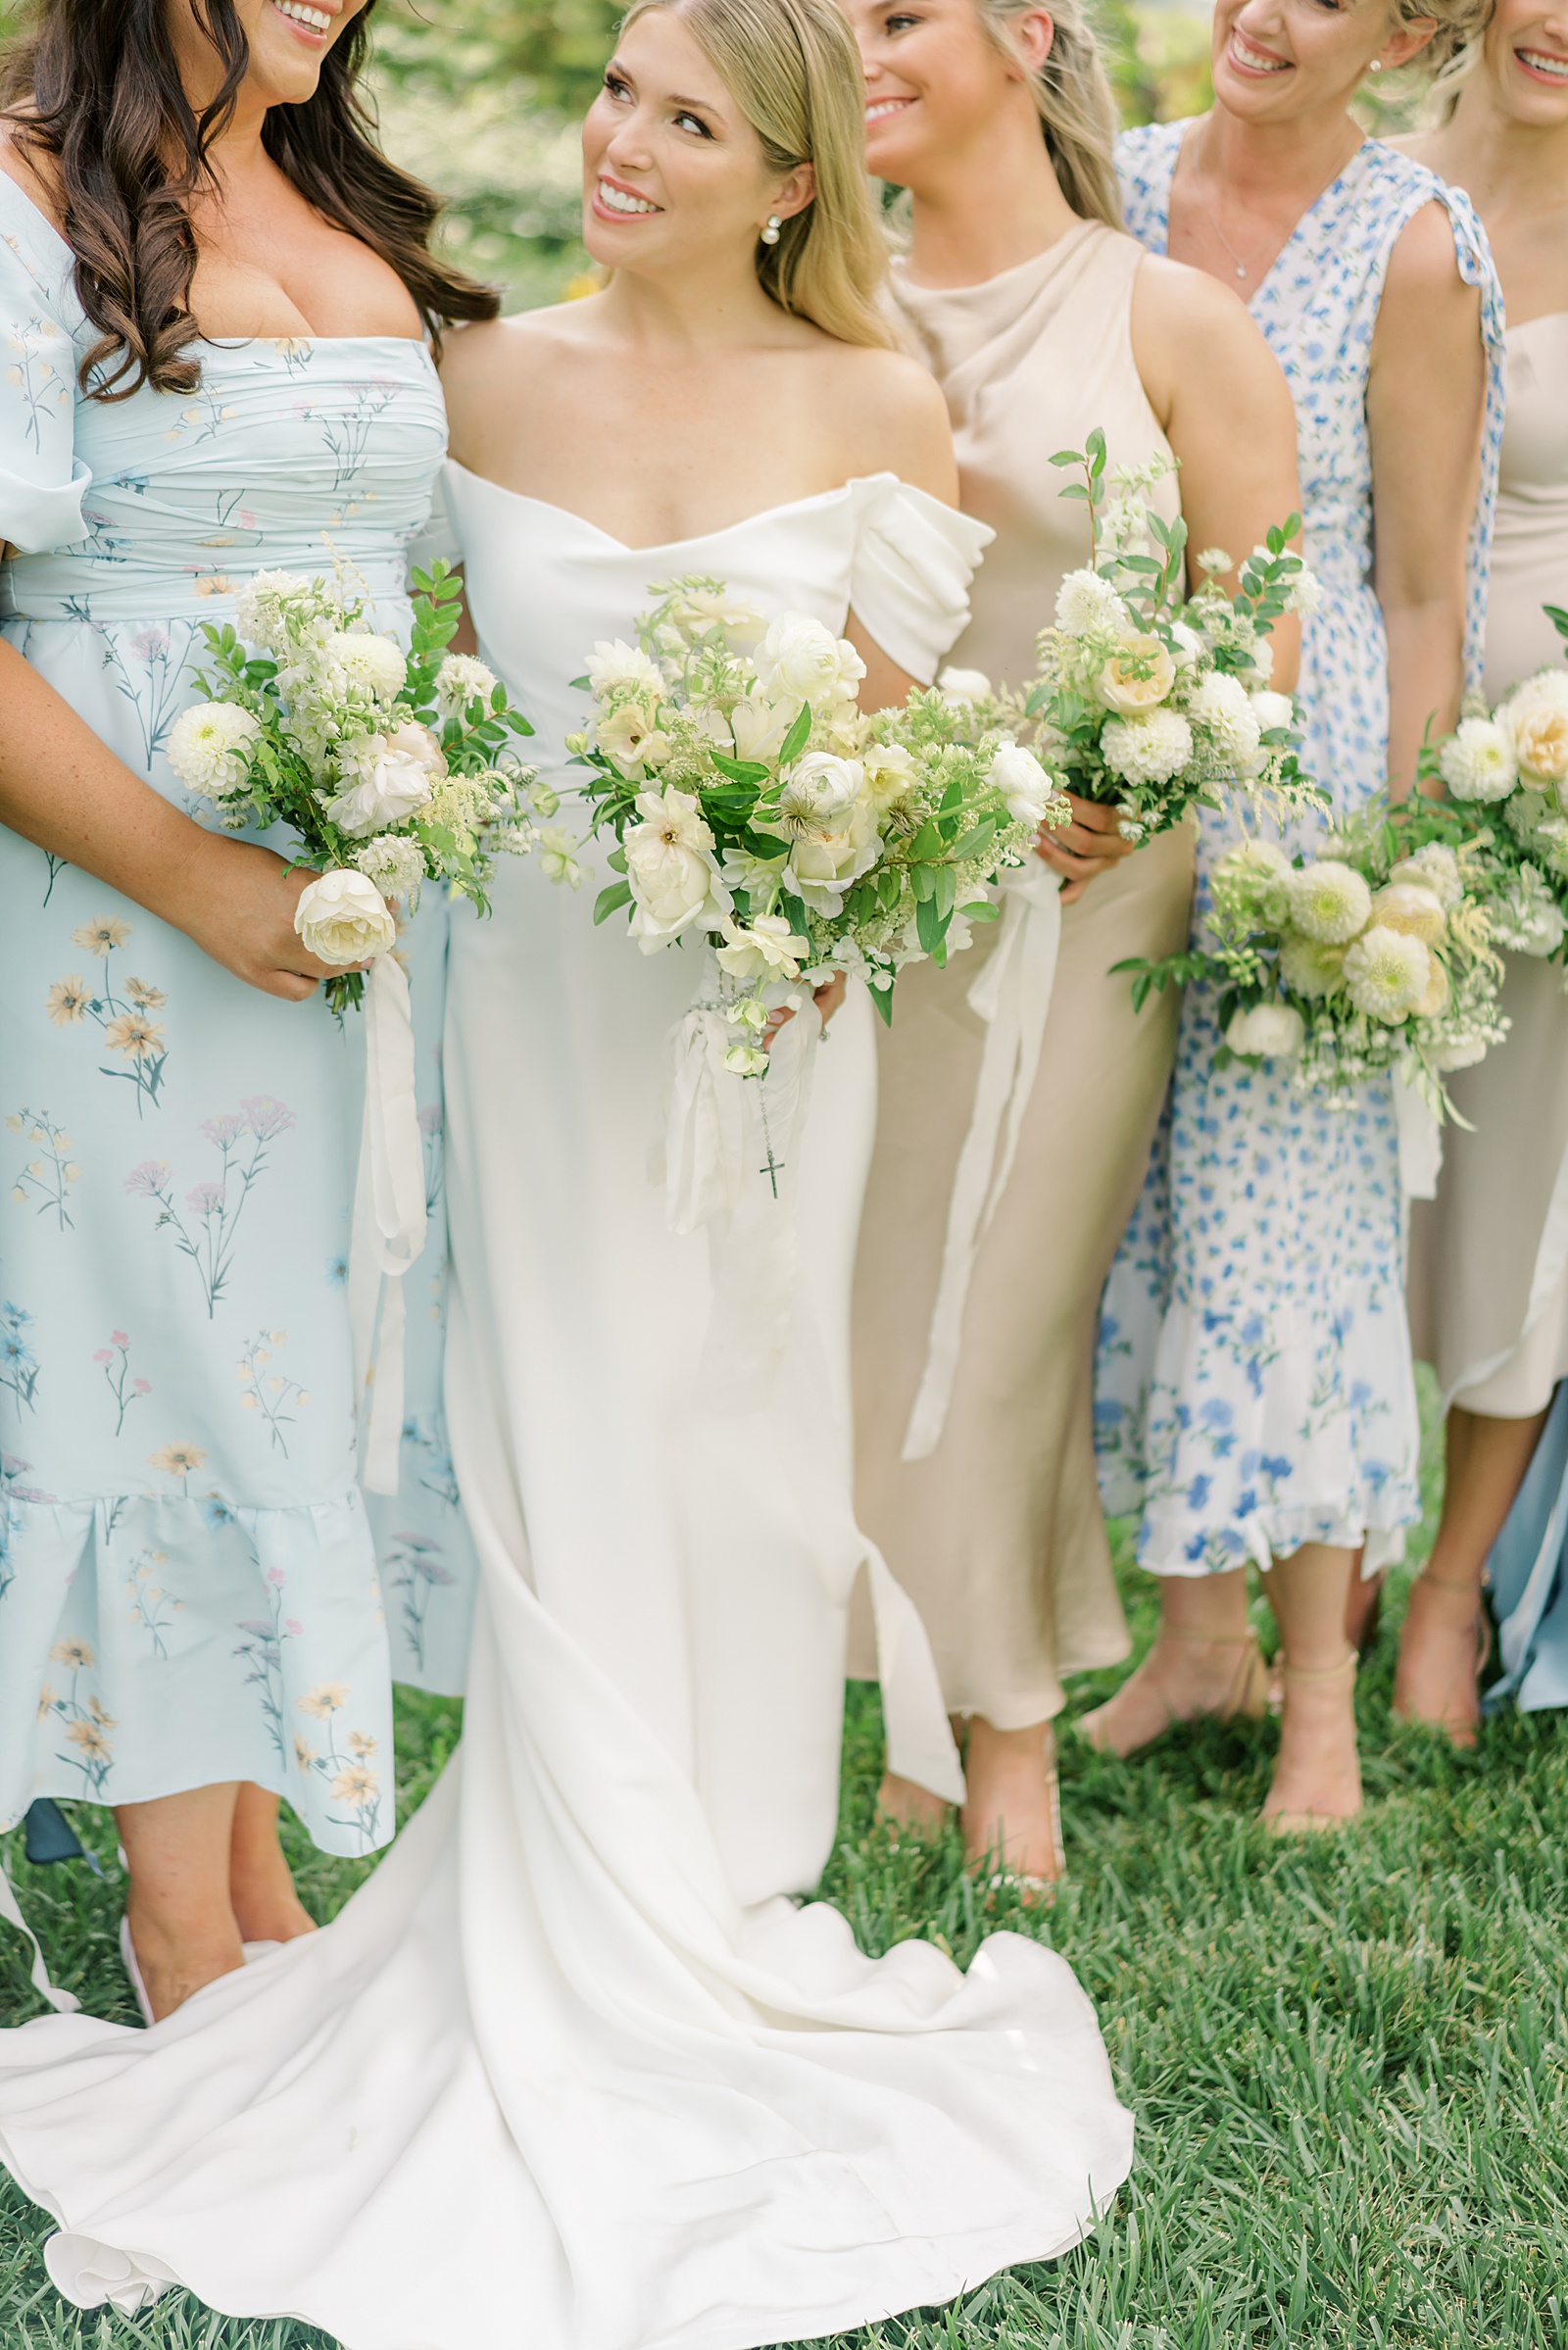 White bridesmaids bouquets by Ellie from The Budding Florist